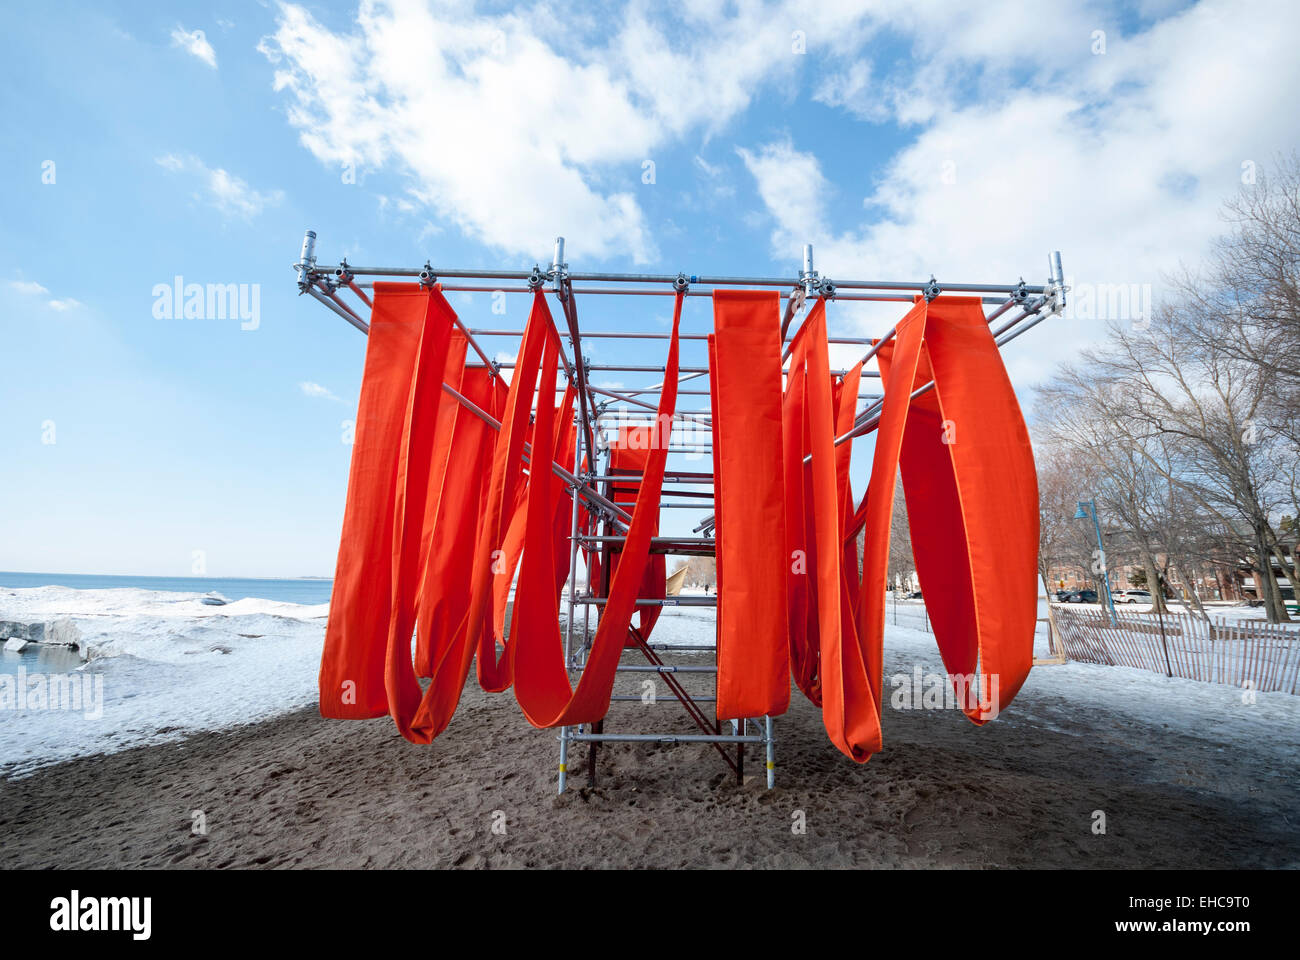 One of five functional temporary art installations built around the seasonal lifeguard stations on Kew Beach in Toronto Canada Stock Photo